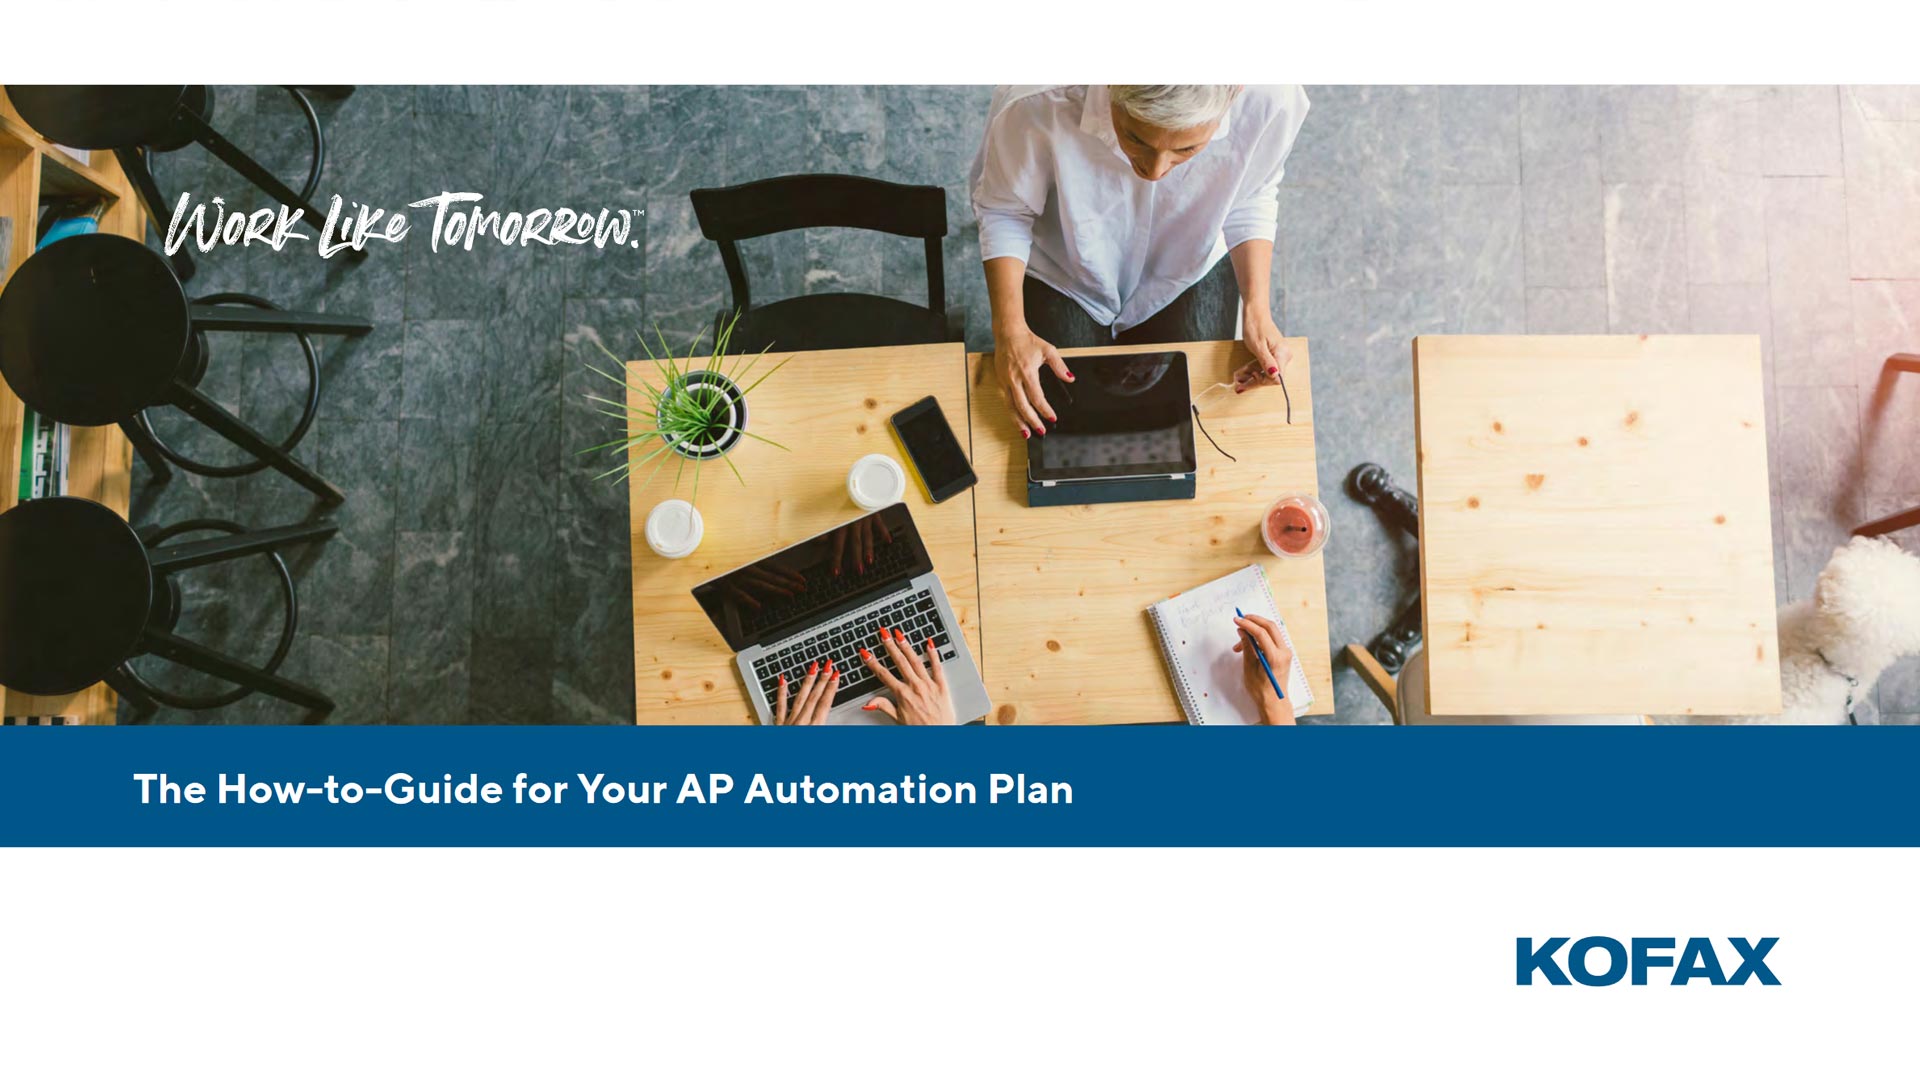 The How-to-Guide for Your AP Automation Plan